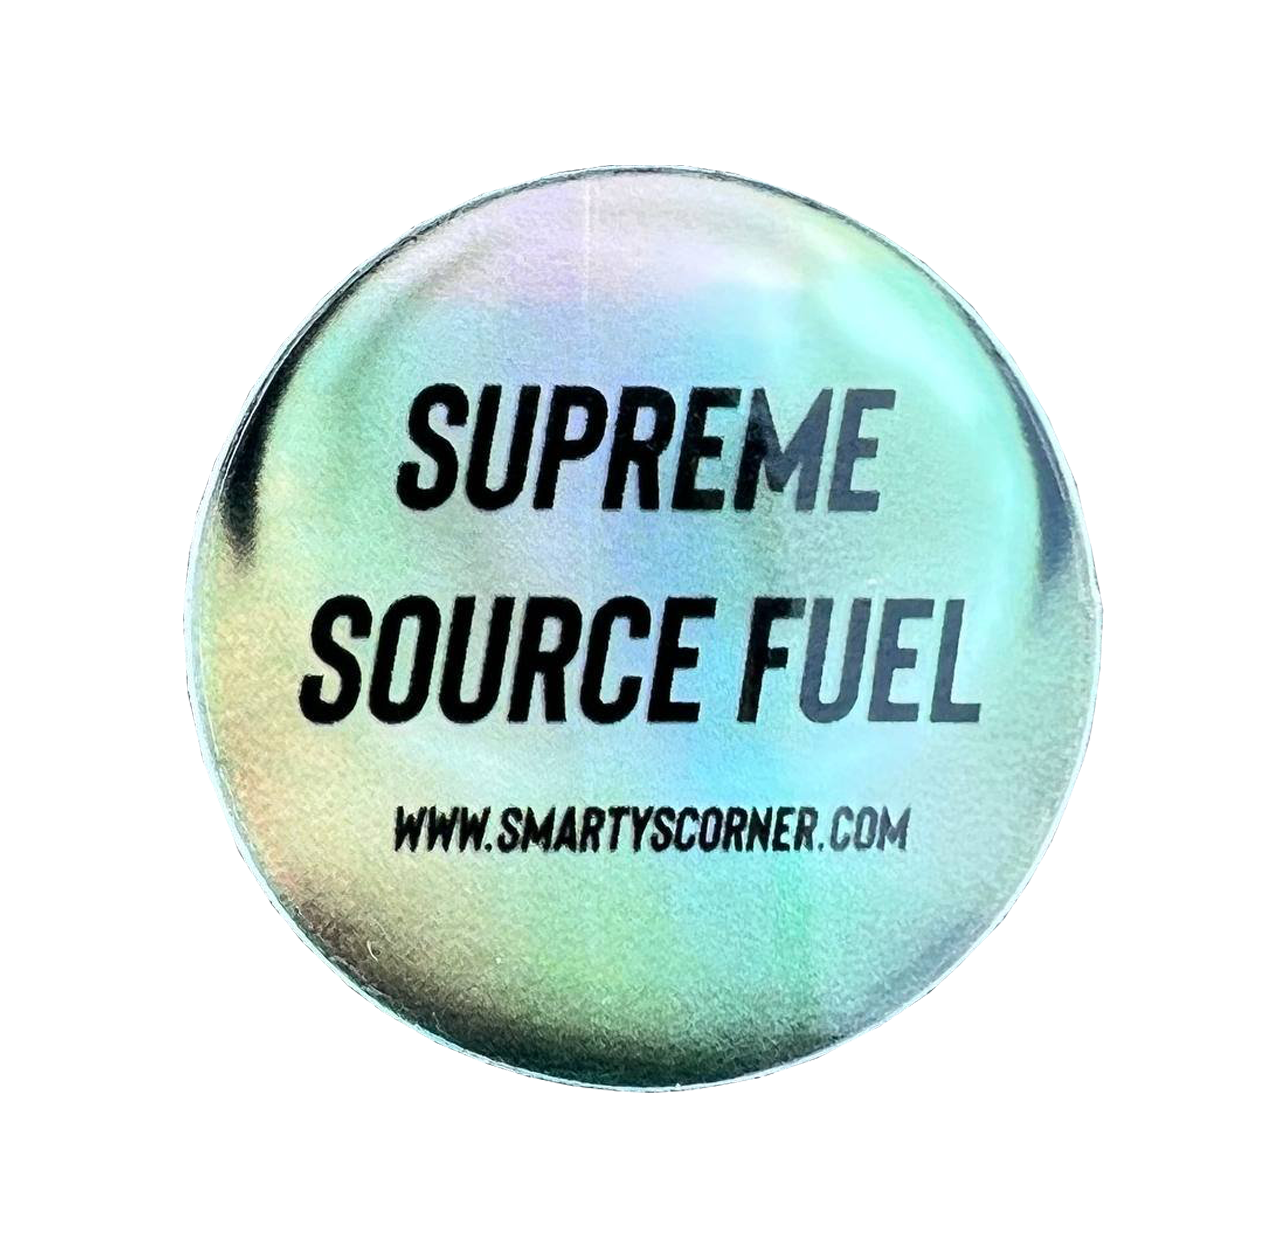 Holotech Source Fuel Sticker - Reduces Fuel Cost